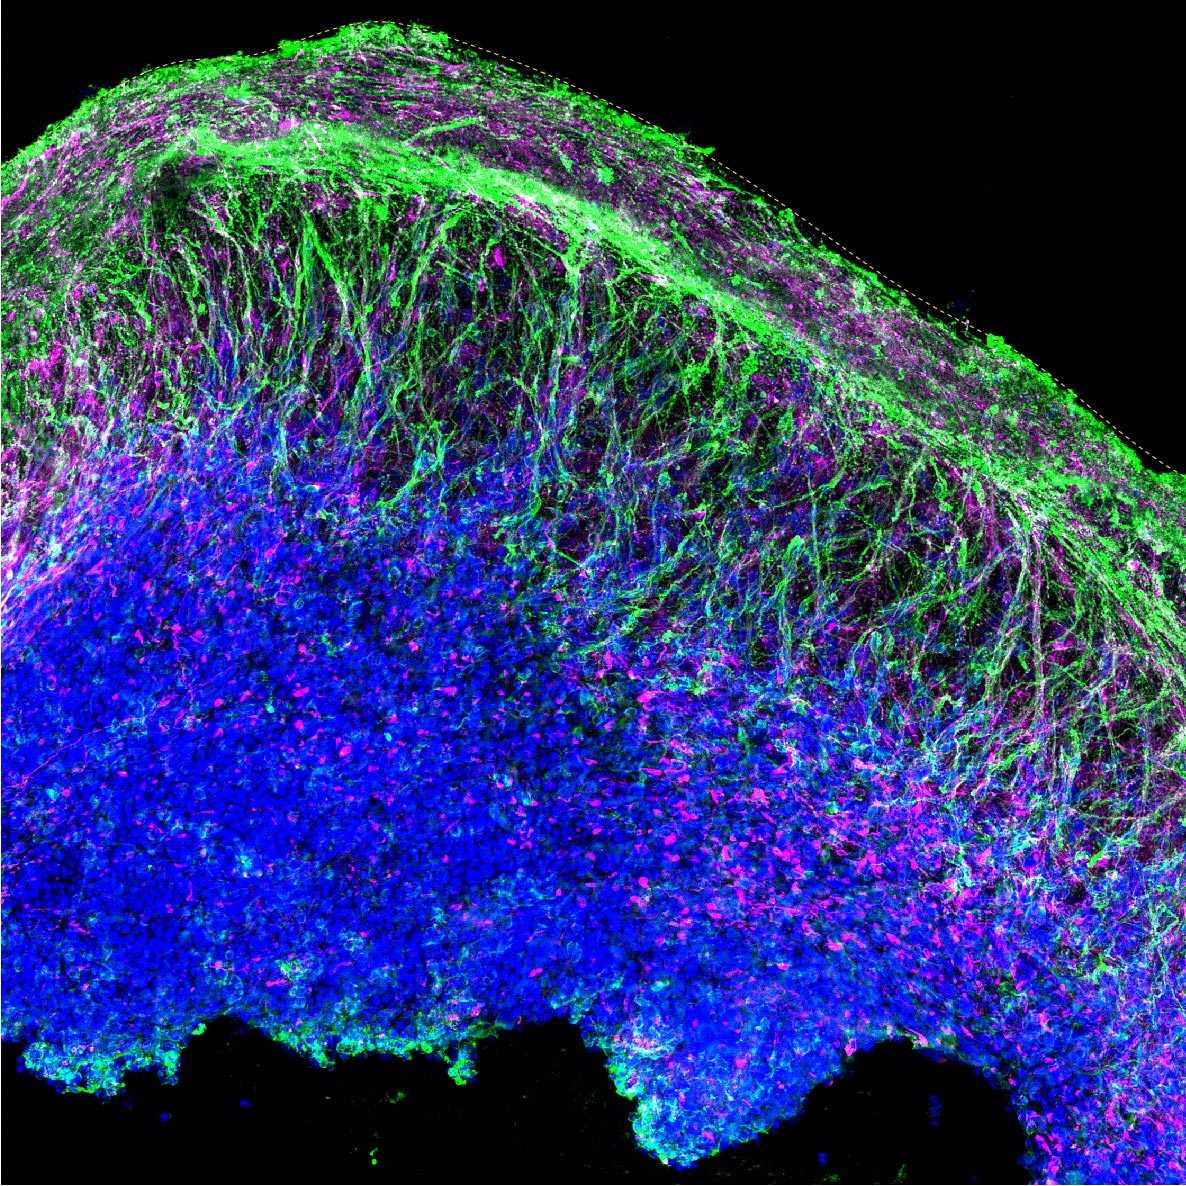 New Window Into Autism From Brain-Like Organoids Grown in a Dish